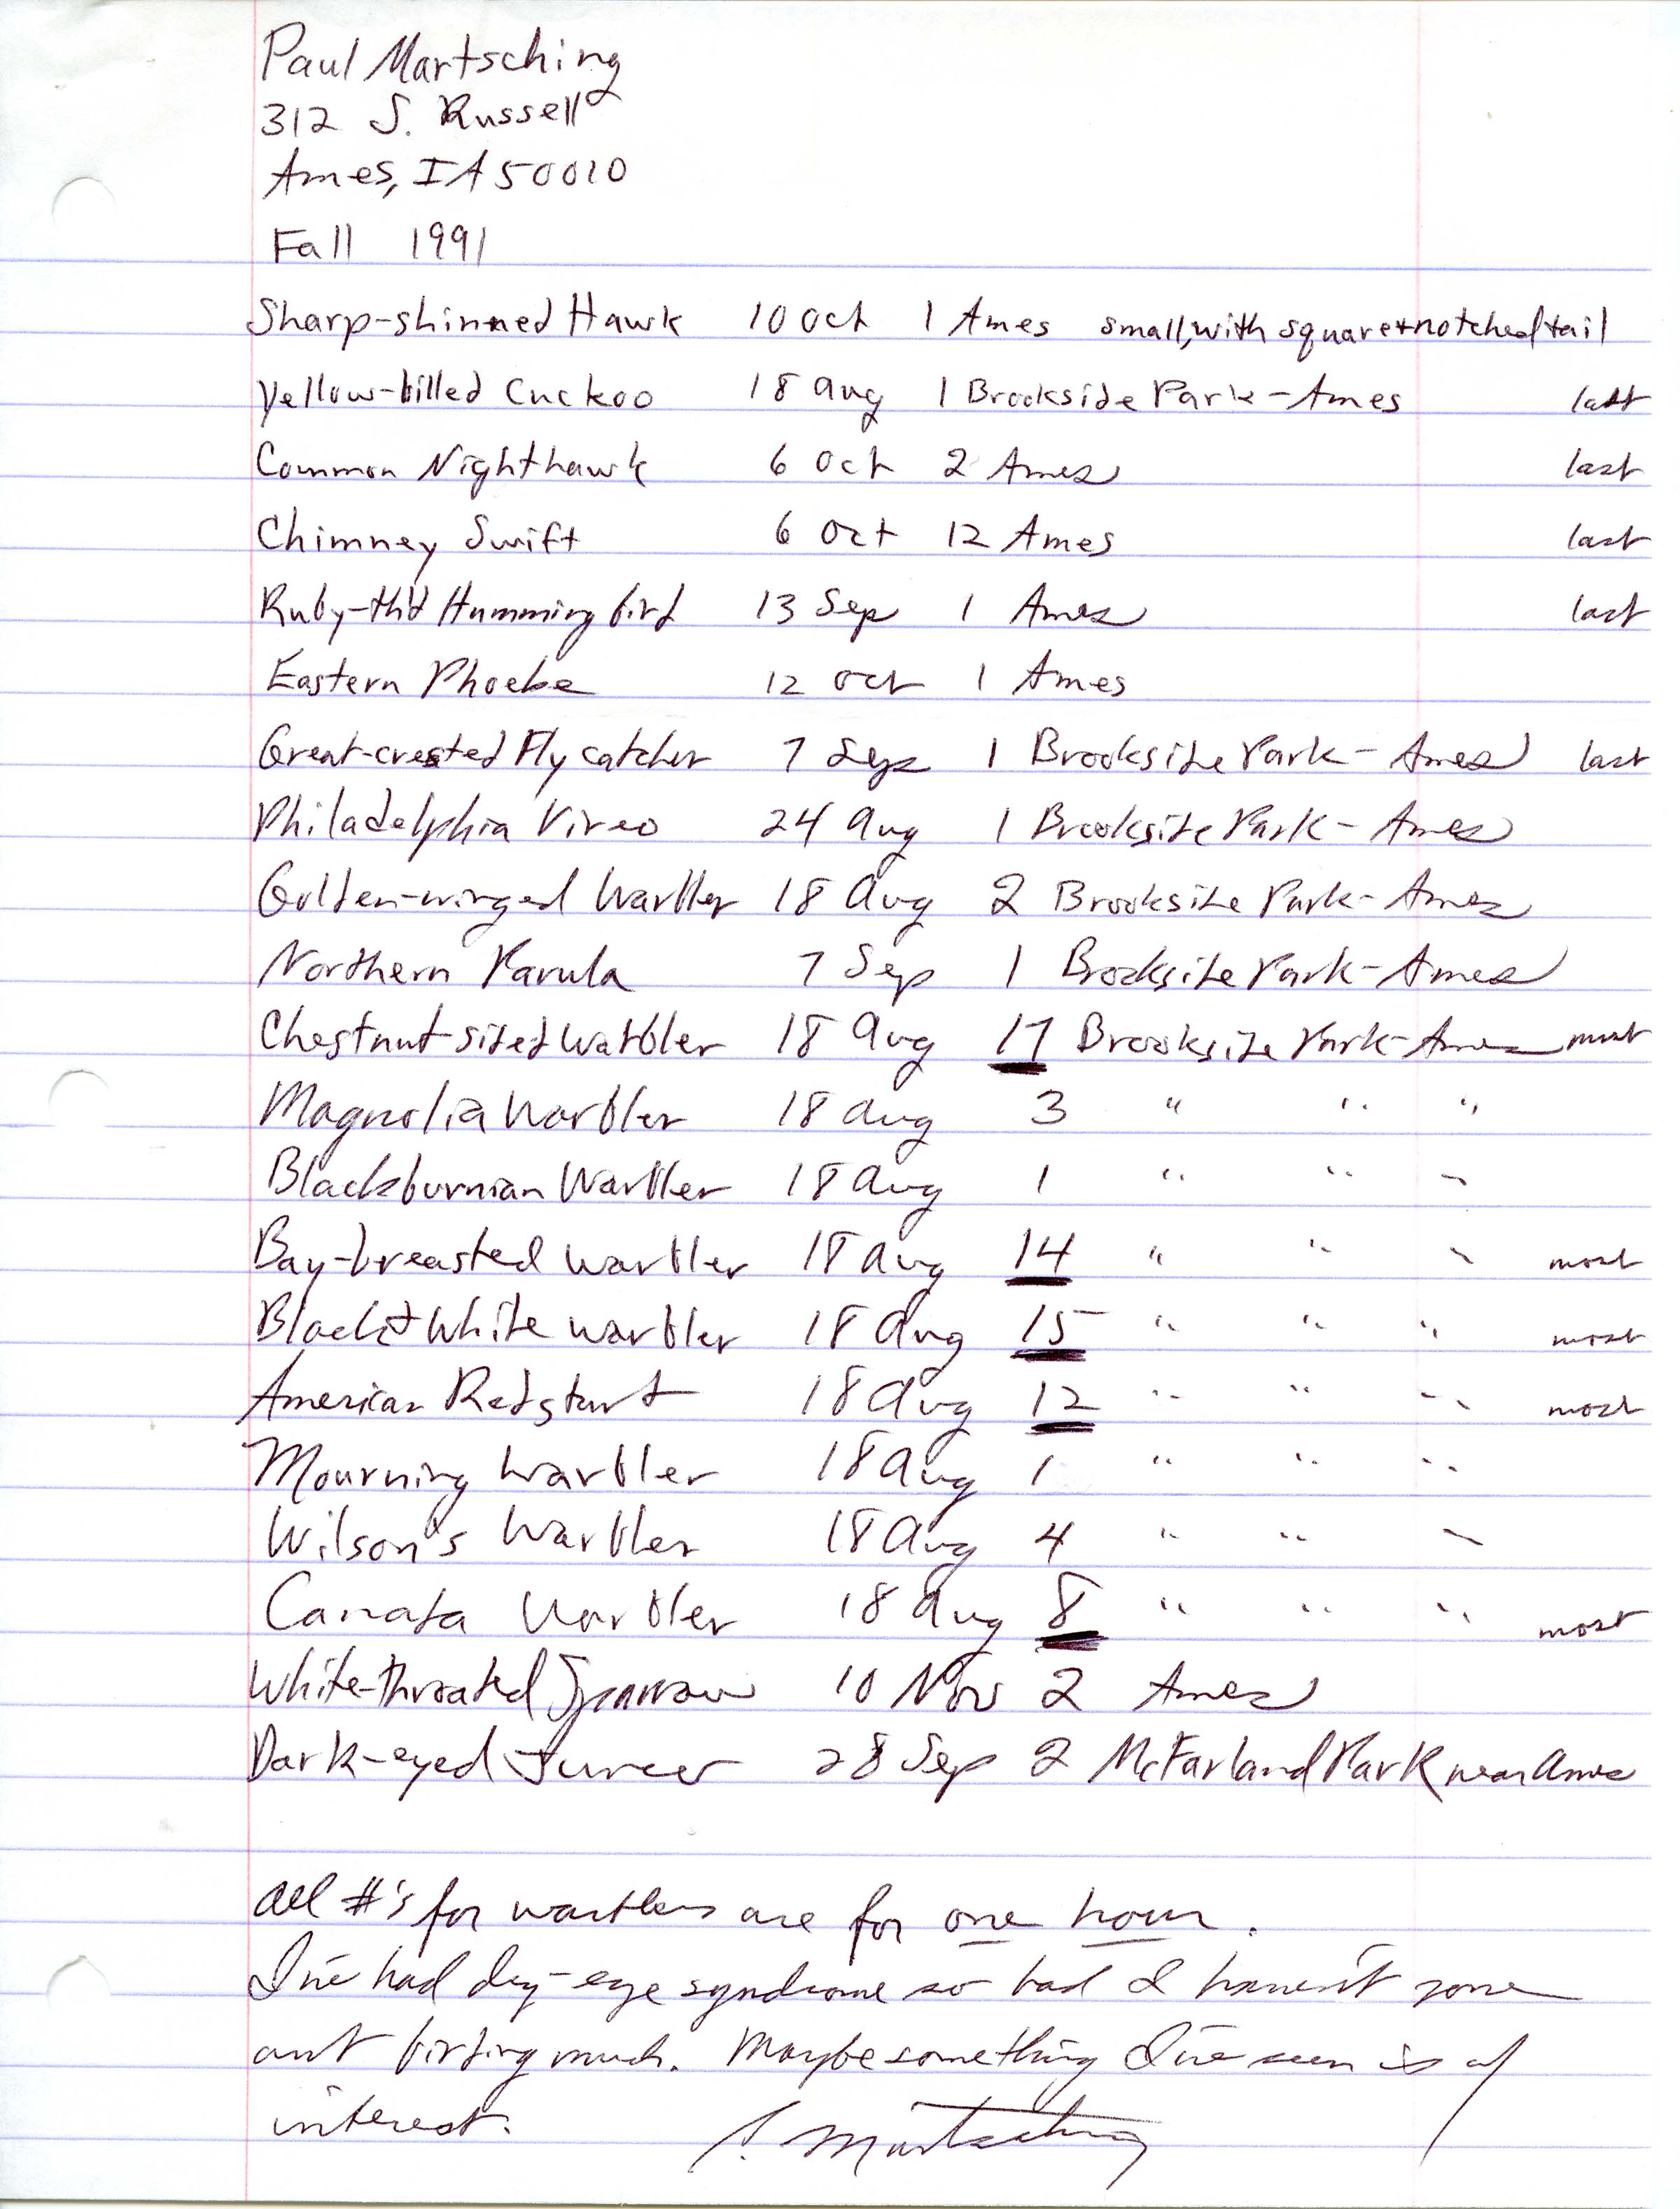 Field notes contributed by Paul Martsching, fall 1991